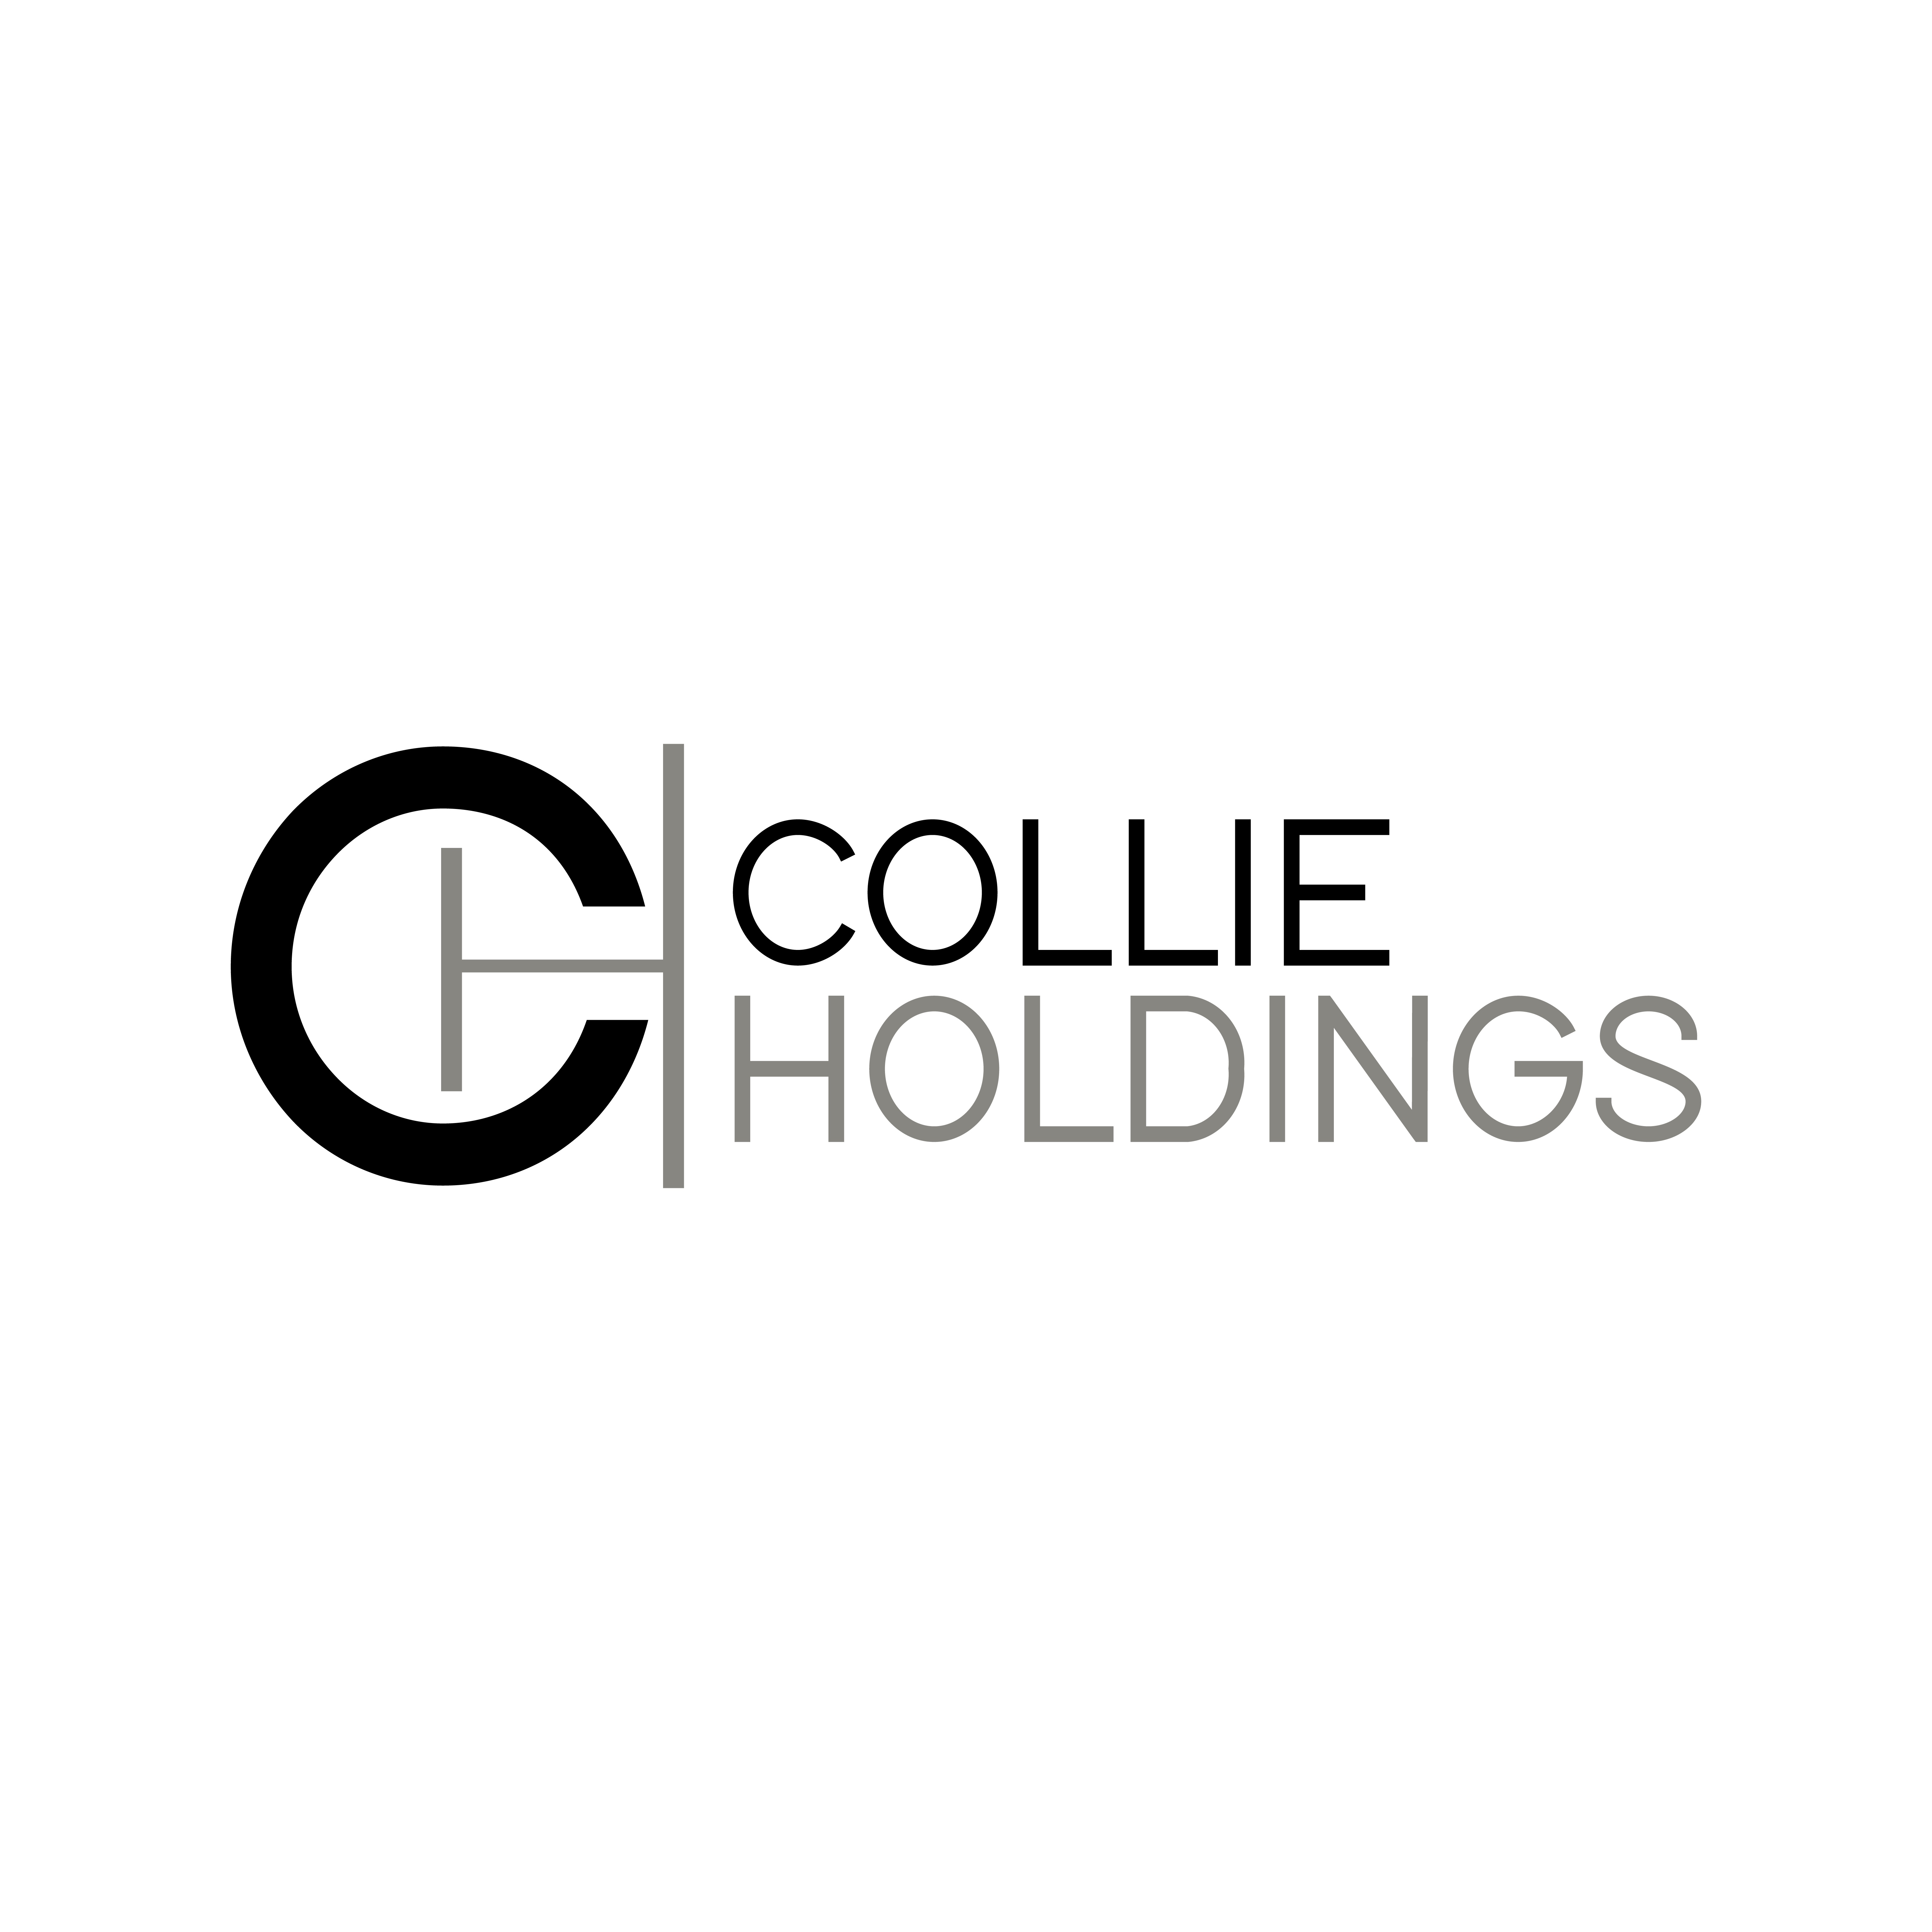 The logo or business face of "Collie Holdings "